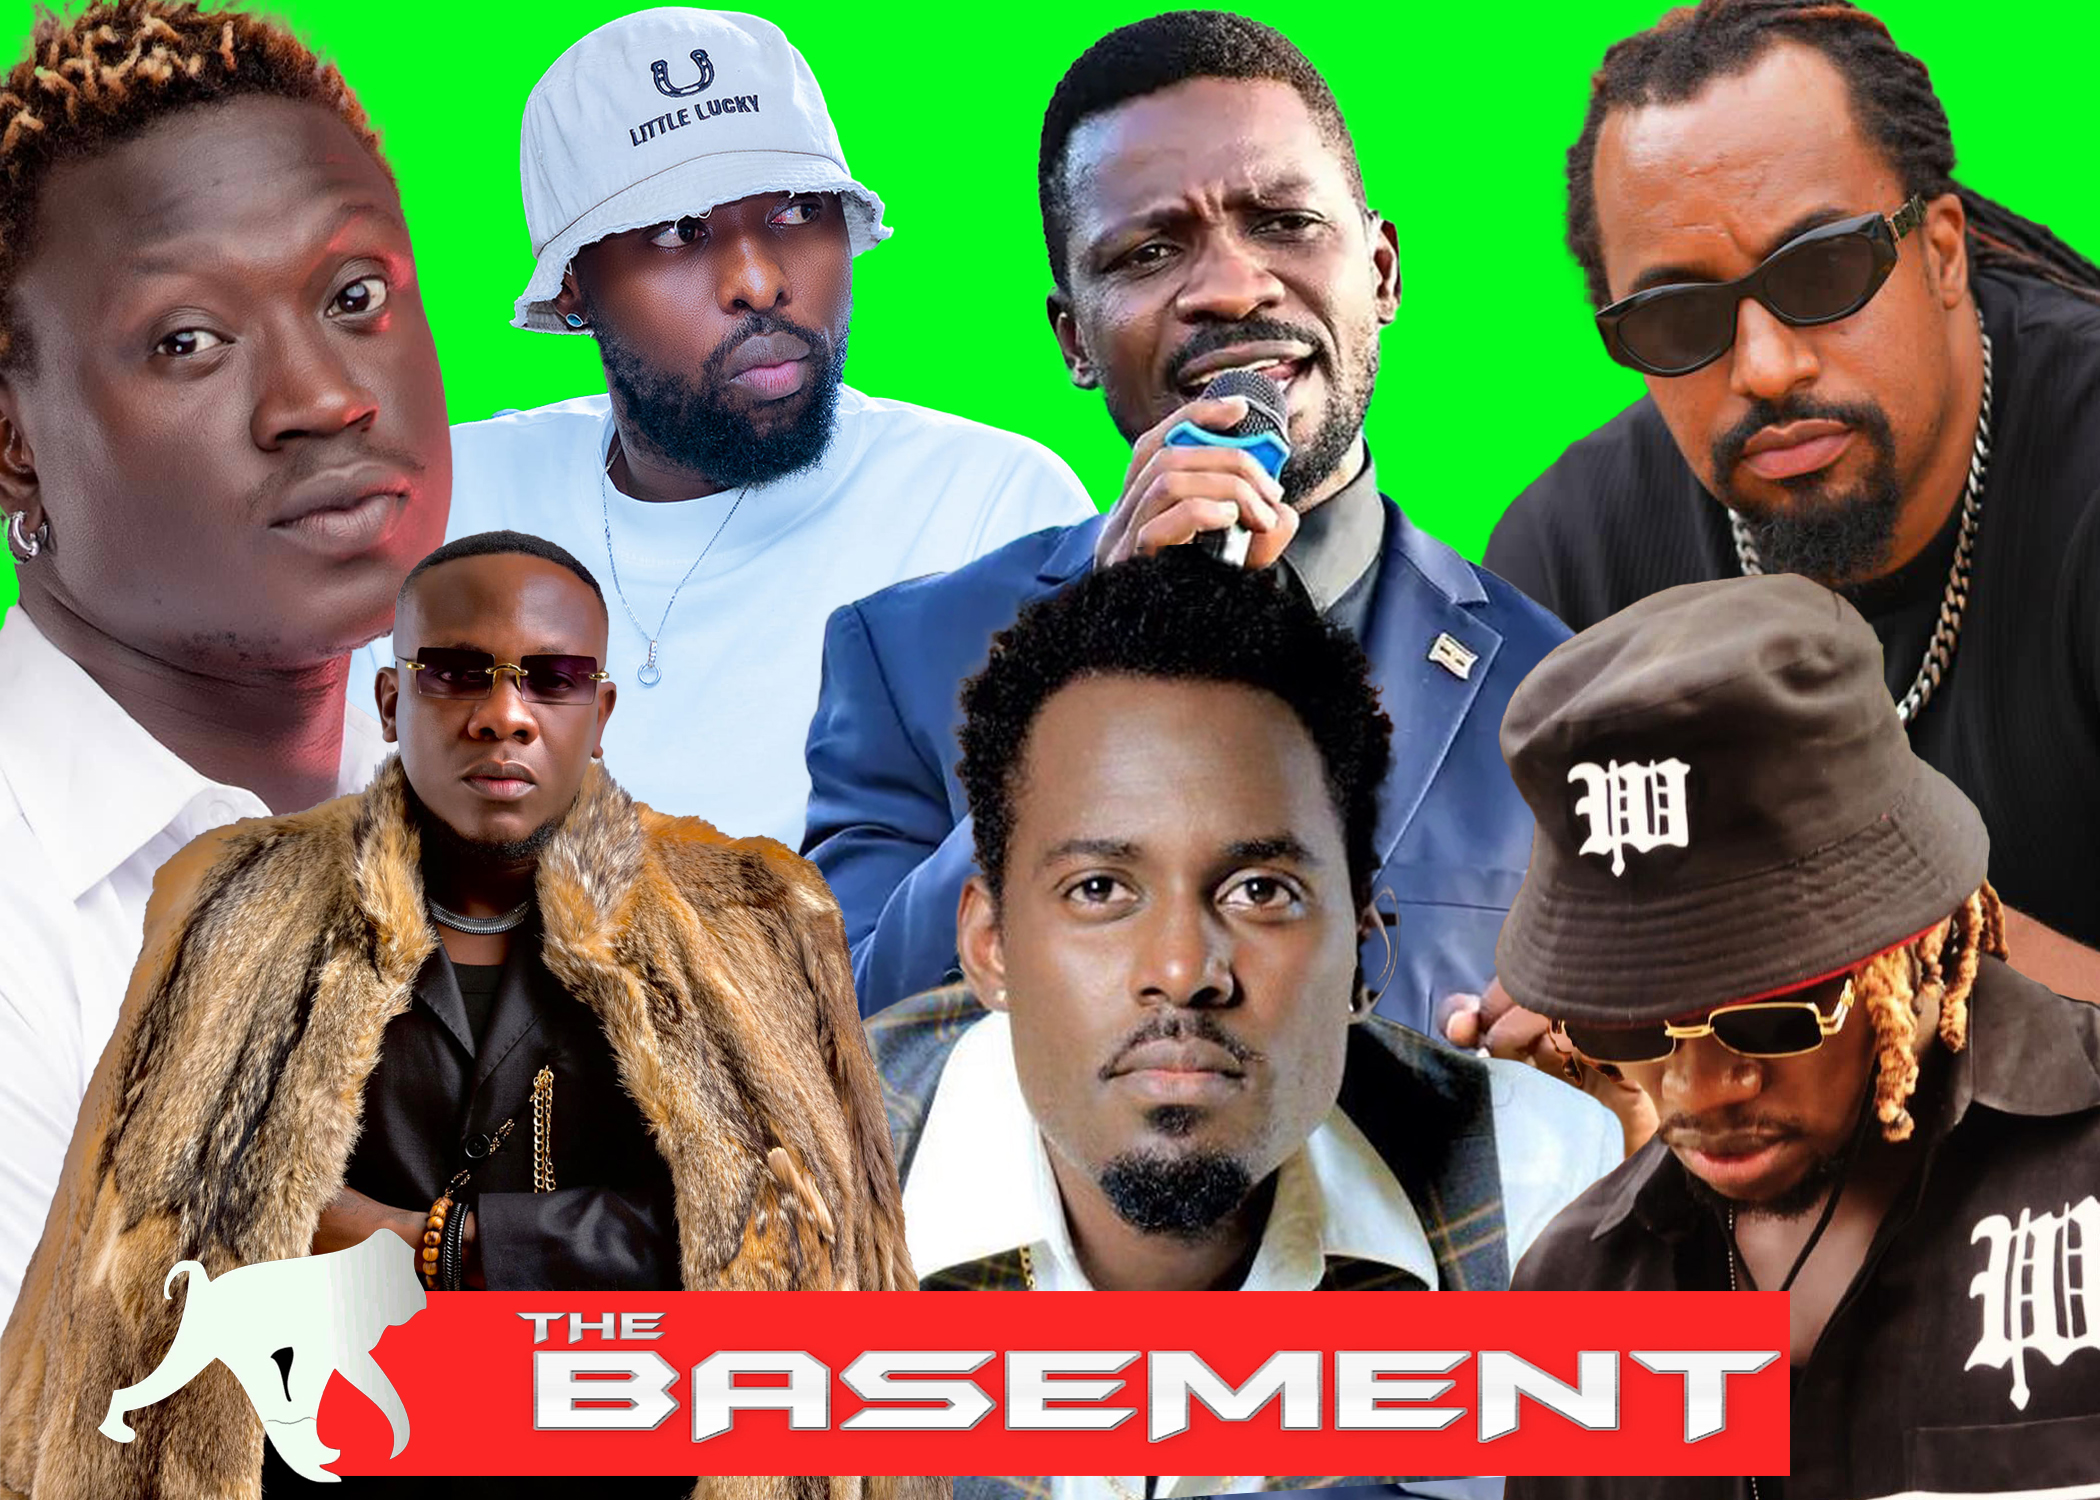  THE BASEMENT EP5: Why Are Artists Organizing Concerts On The Same Dates? Frank Ntambi Answers.